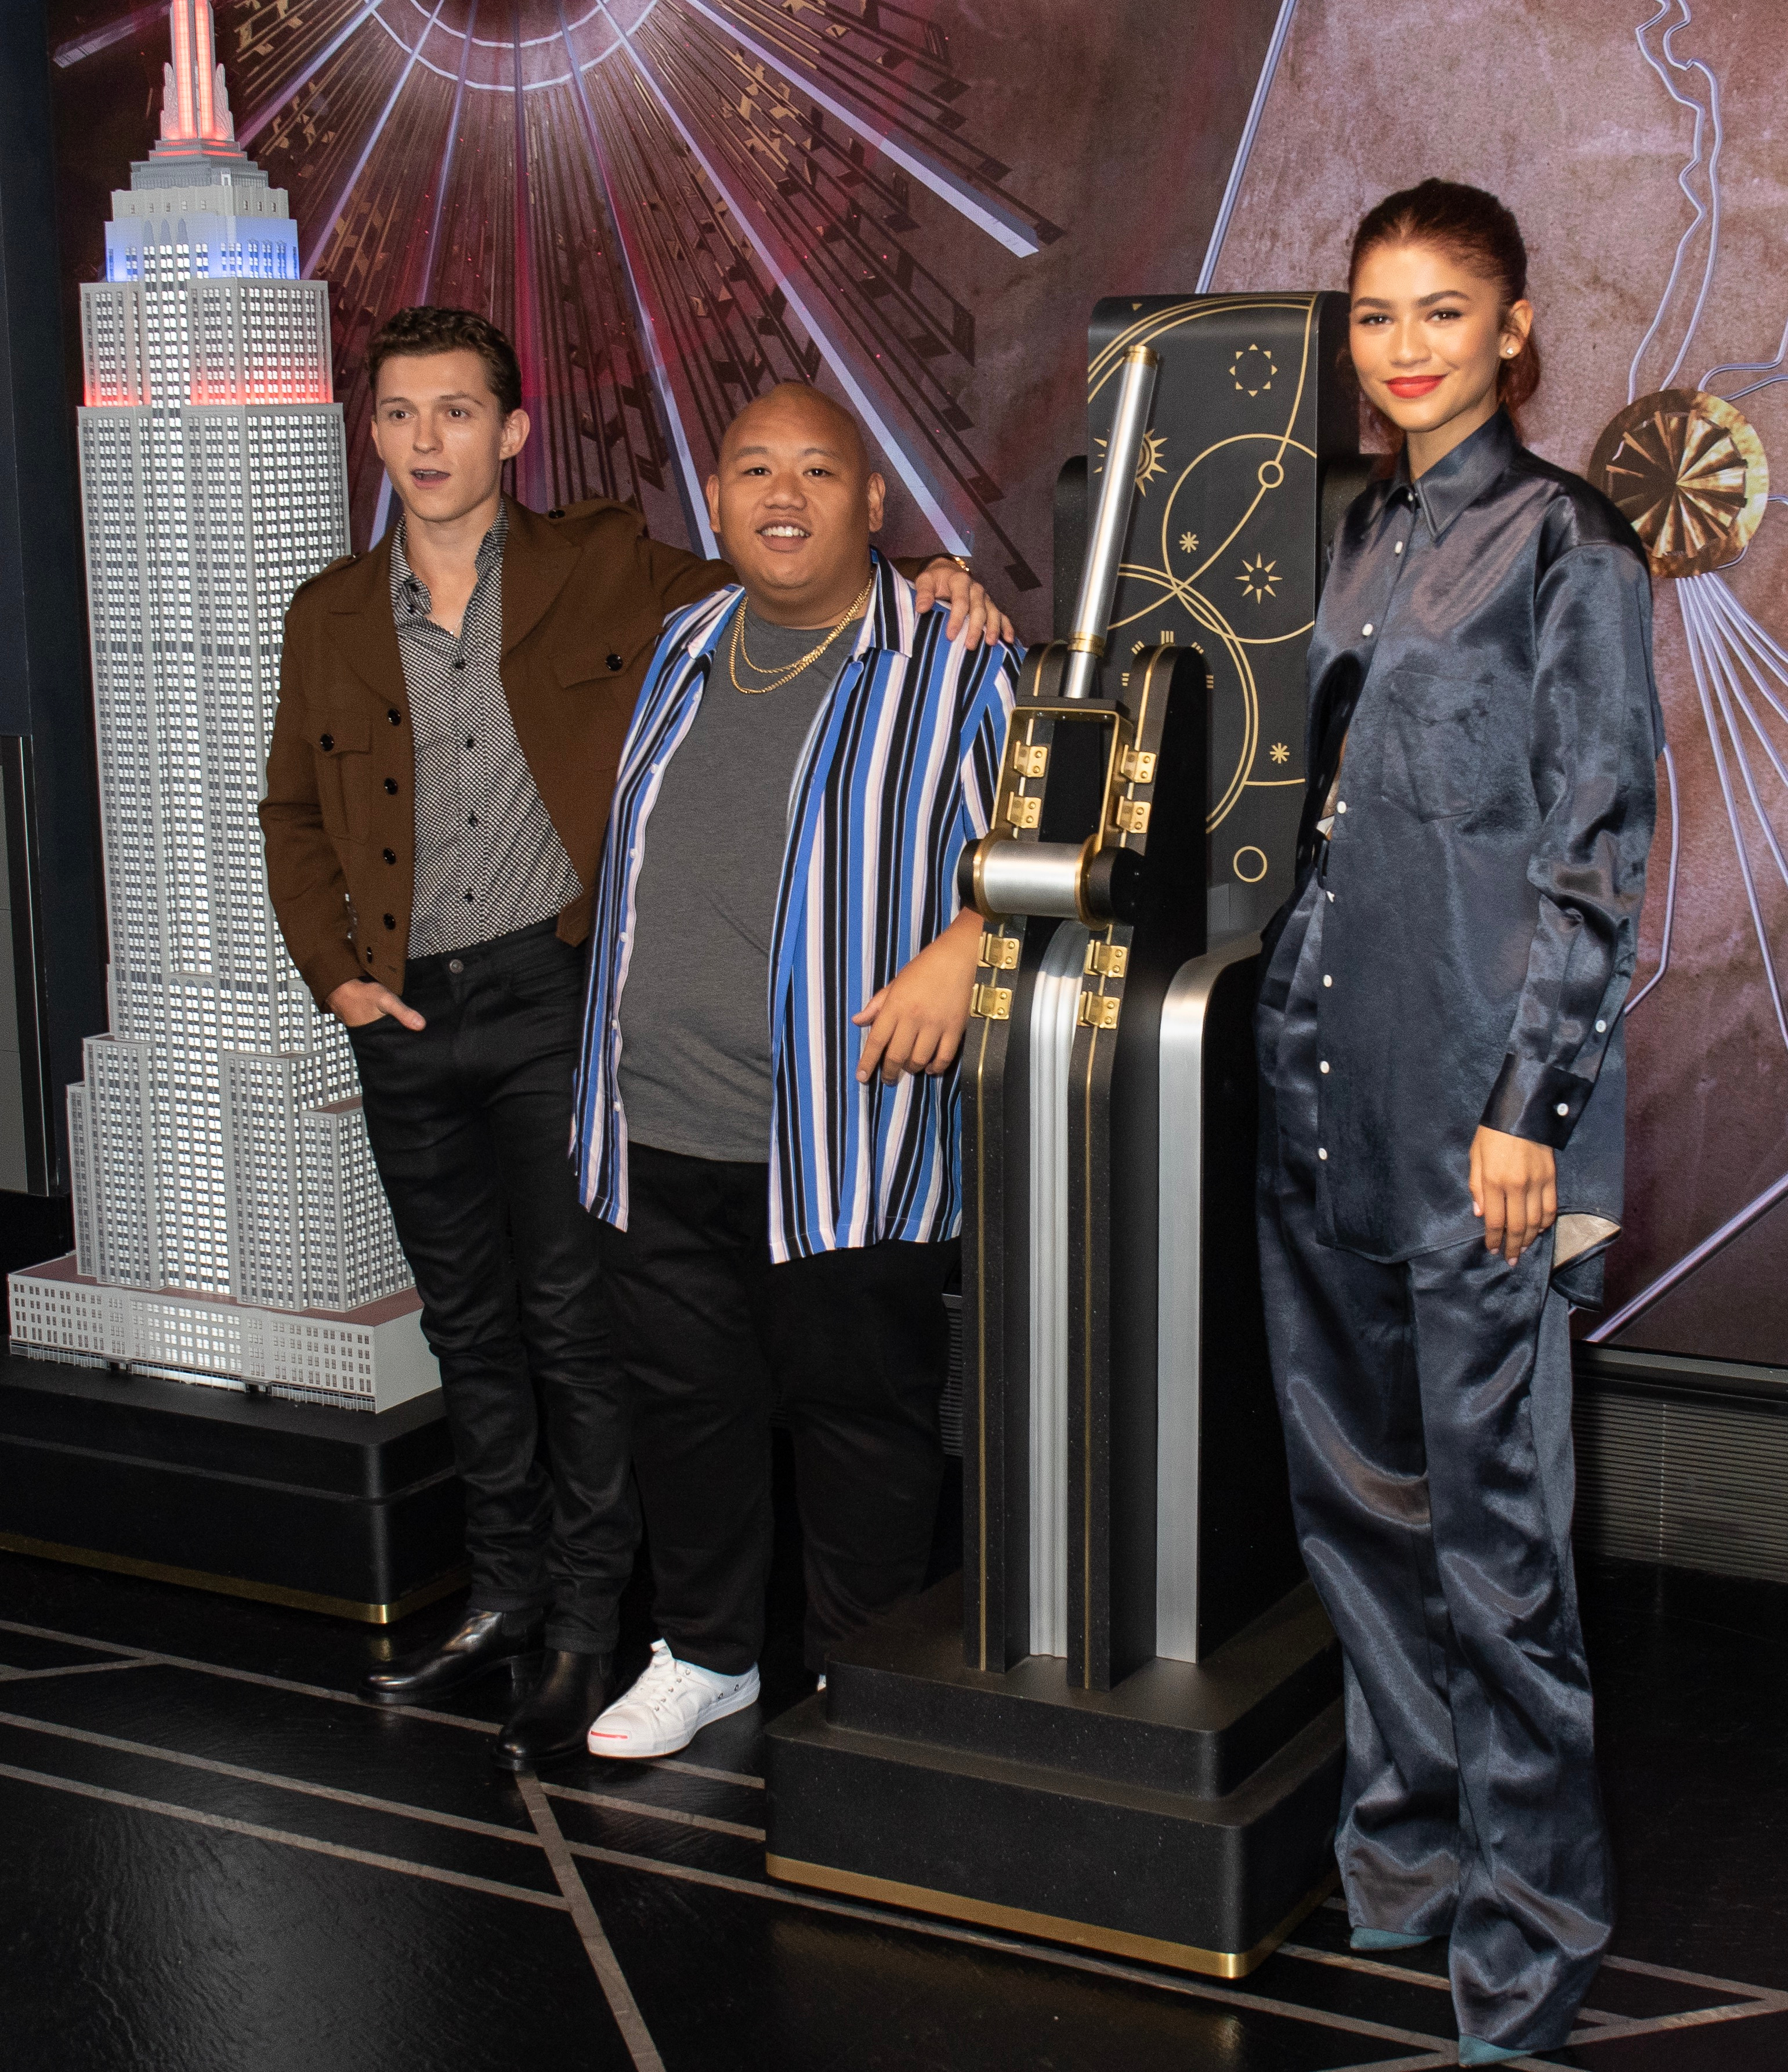 The cast of Spider-Man in New York, June 24, 2019